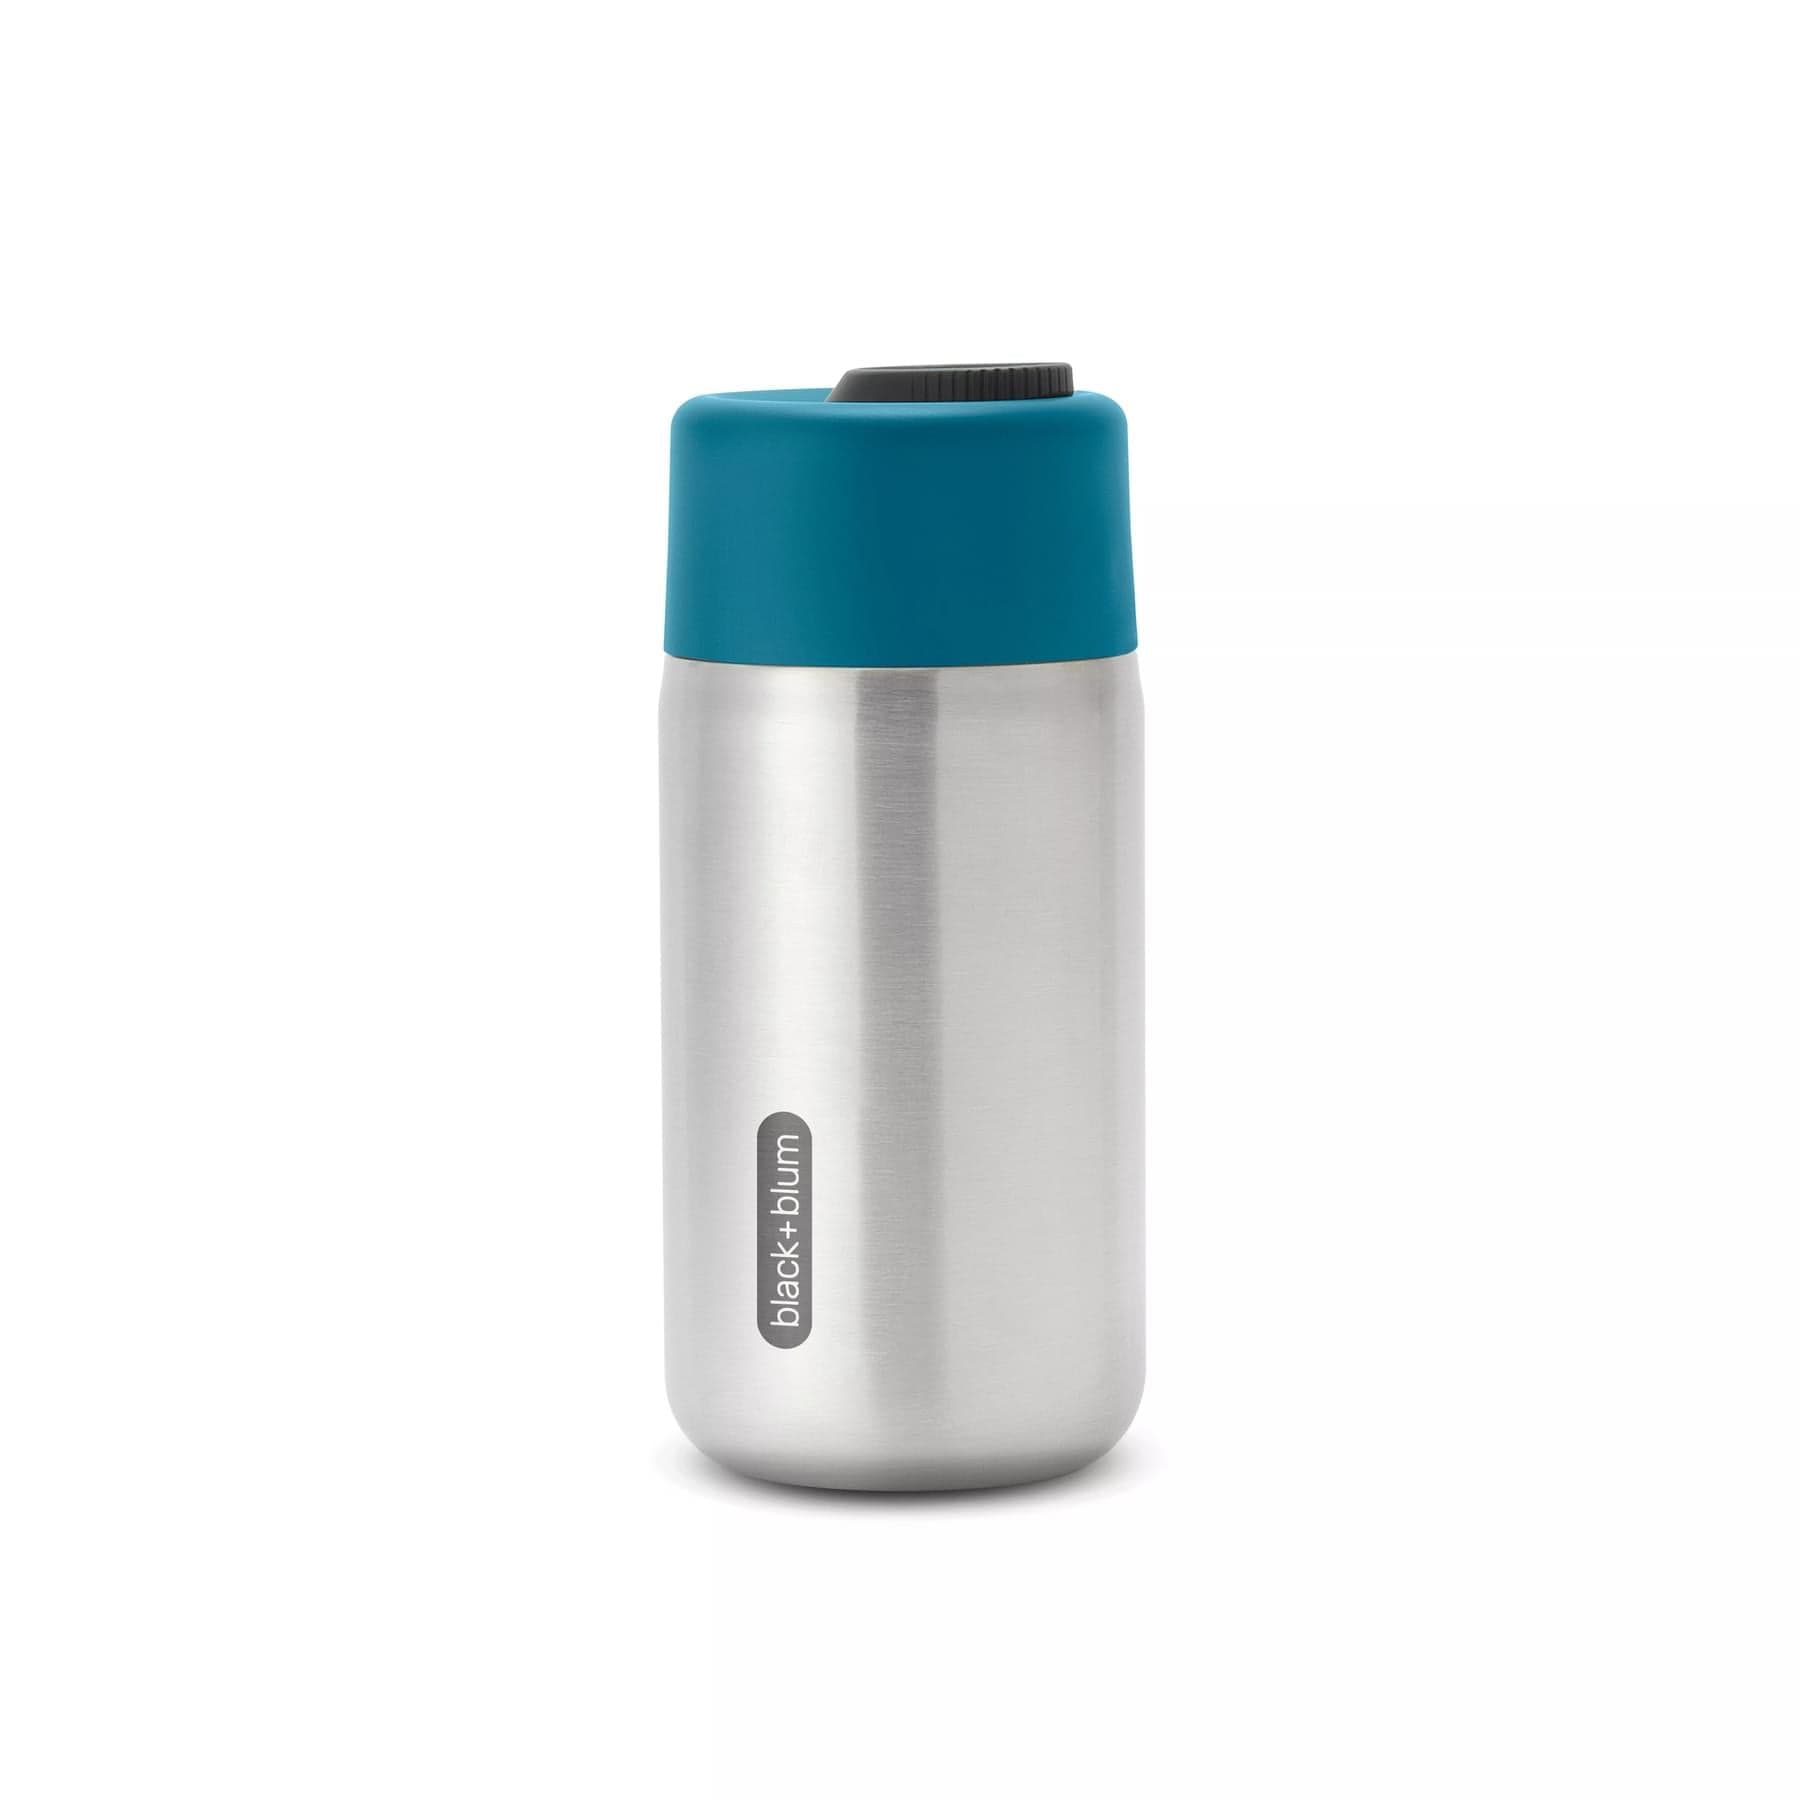 Stainless steel insulated travel mug by Black+Blum with teal lid on white background